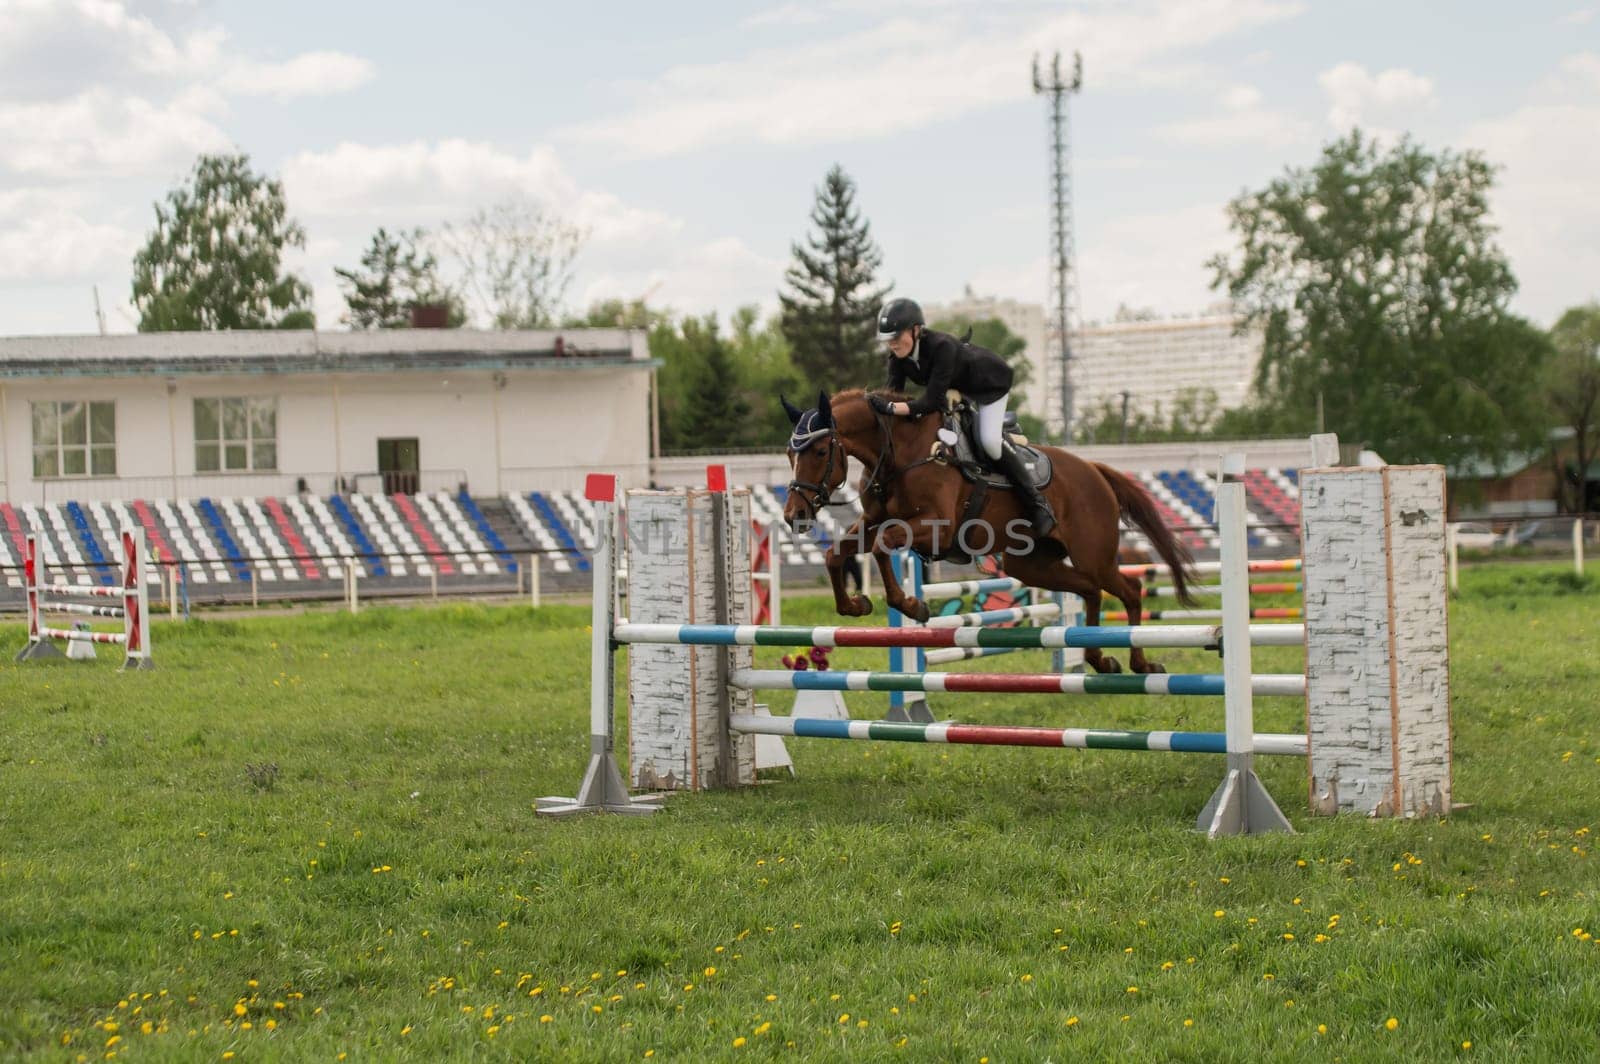 A young girl goes in for horse riding. A horse jumps over a barrier